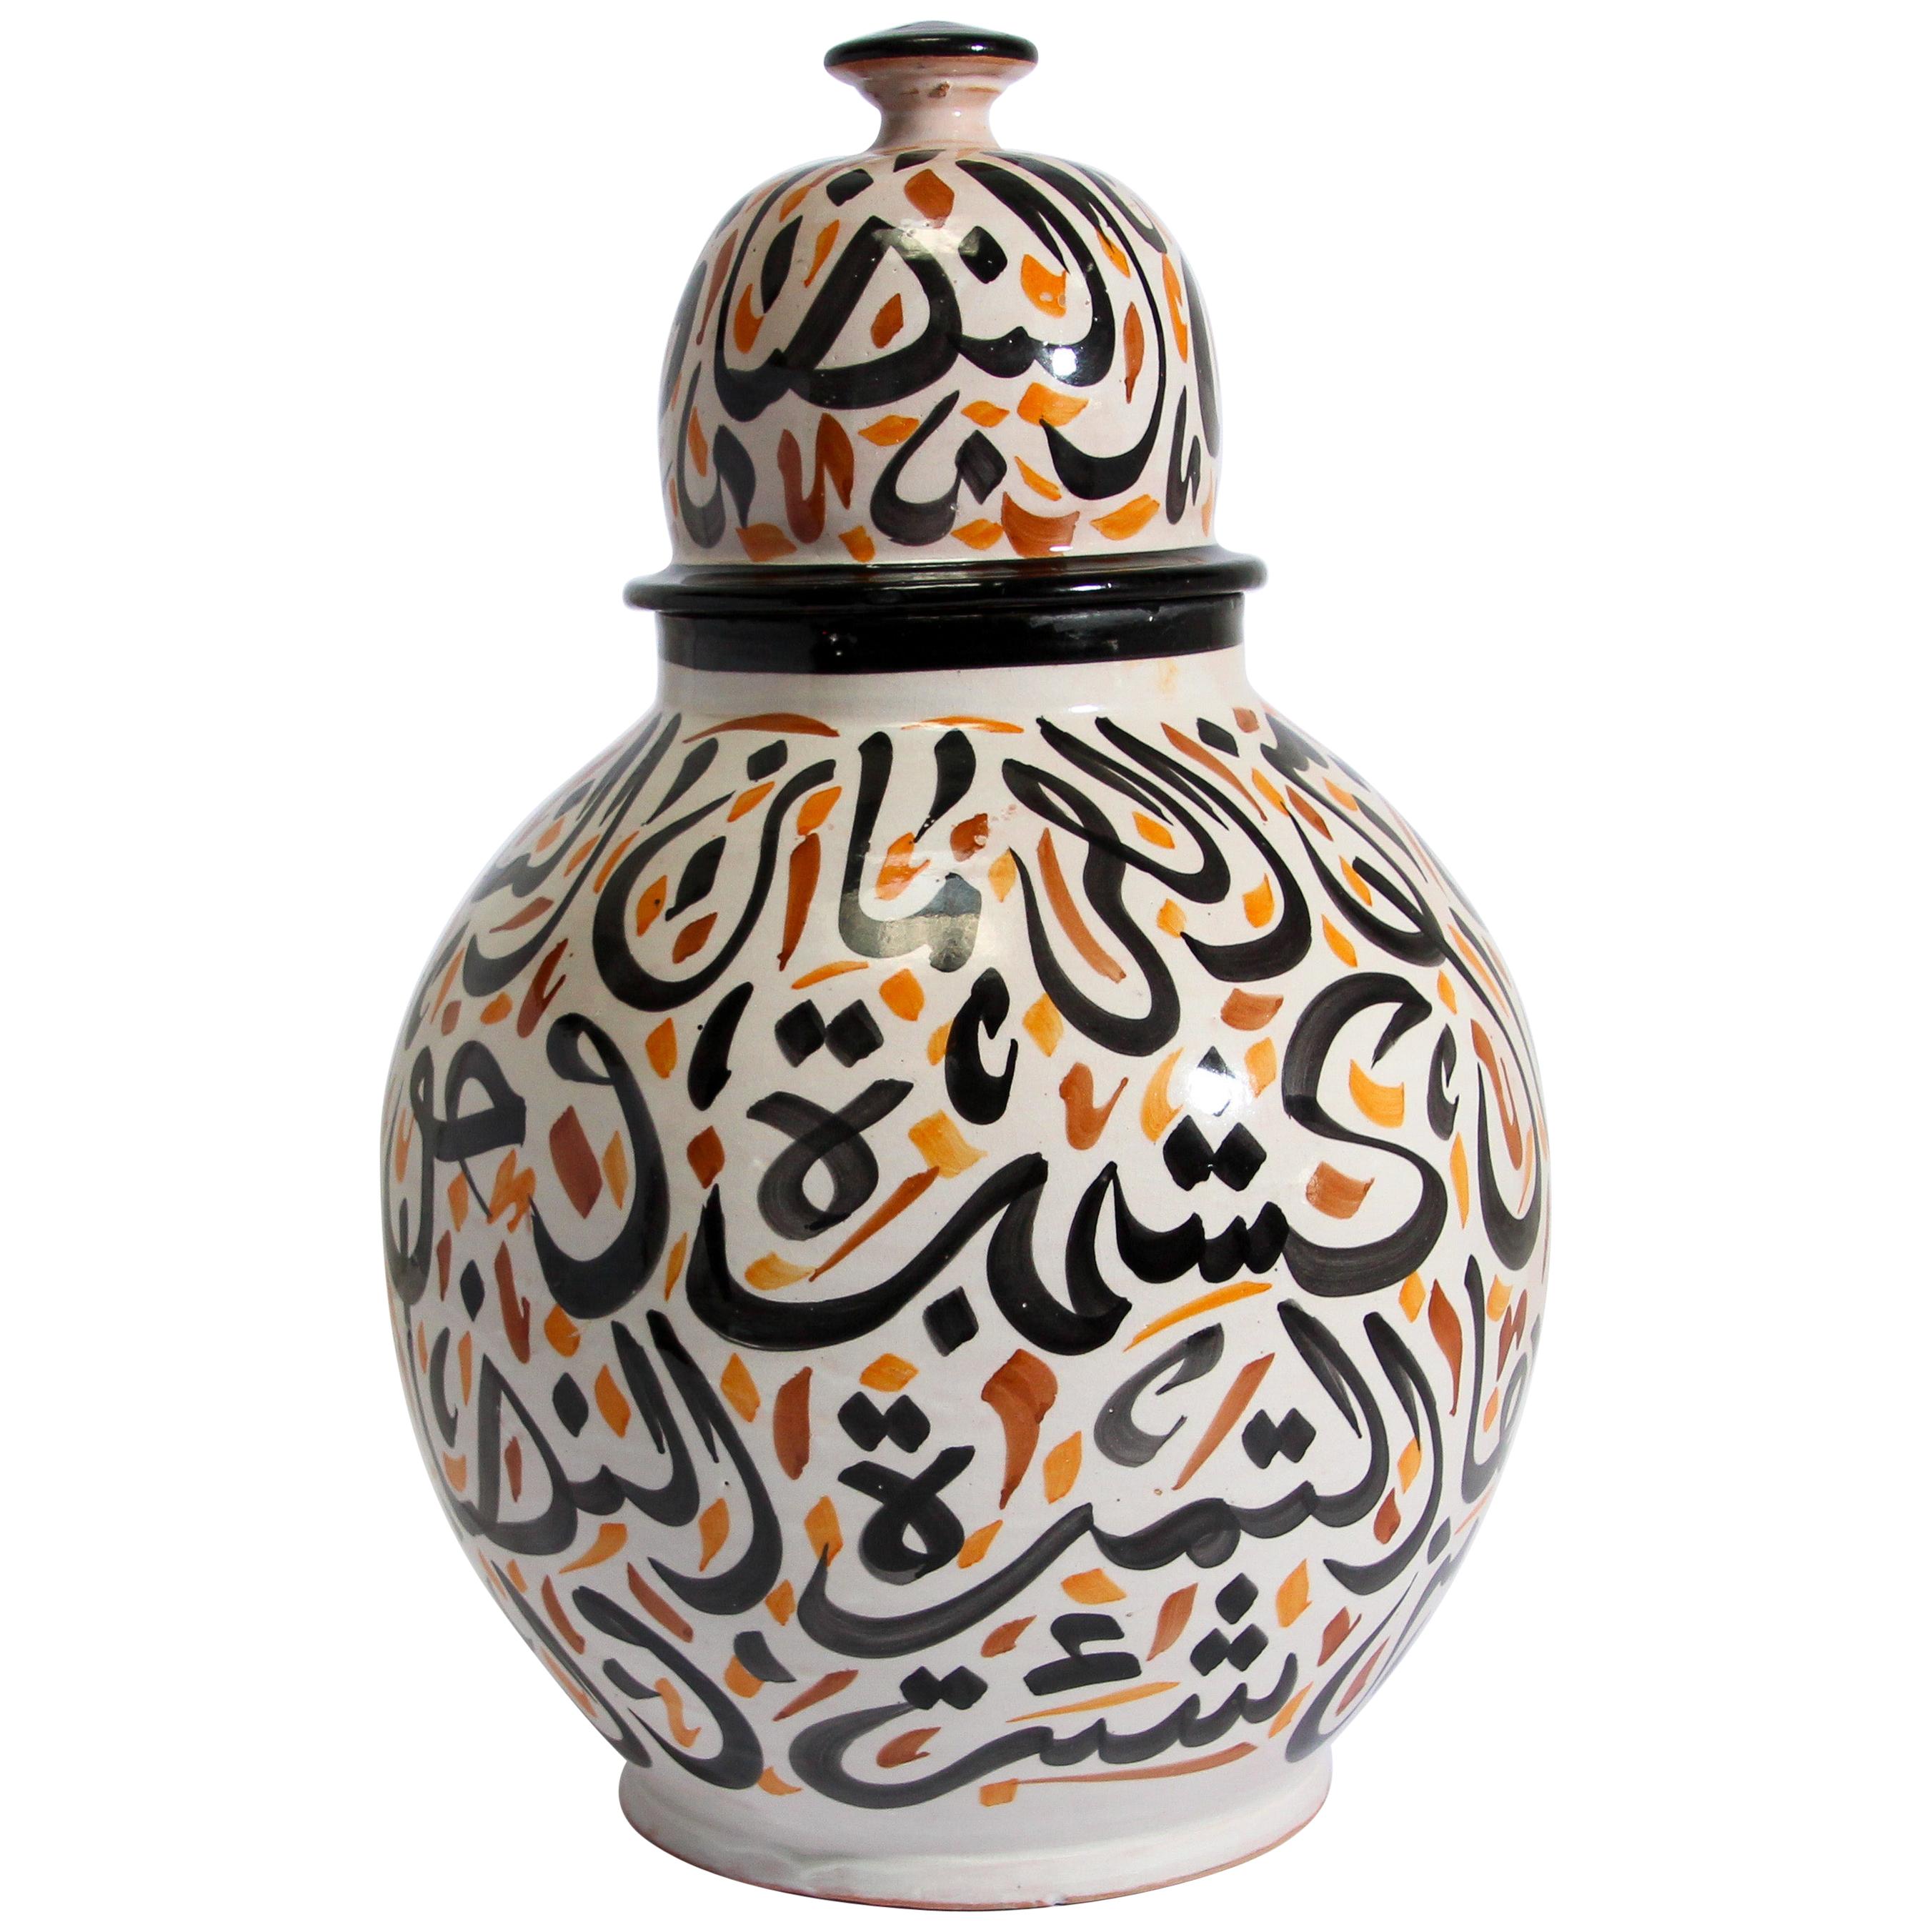 Moroccan Ceramic Lidded Urn with Arabic Calligraphy Lettrism Writing For Sale